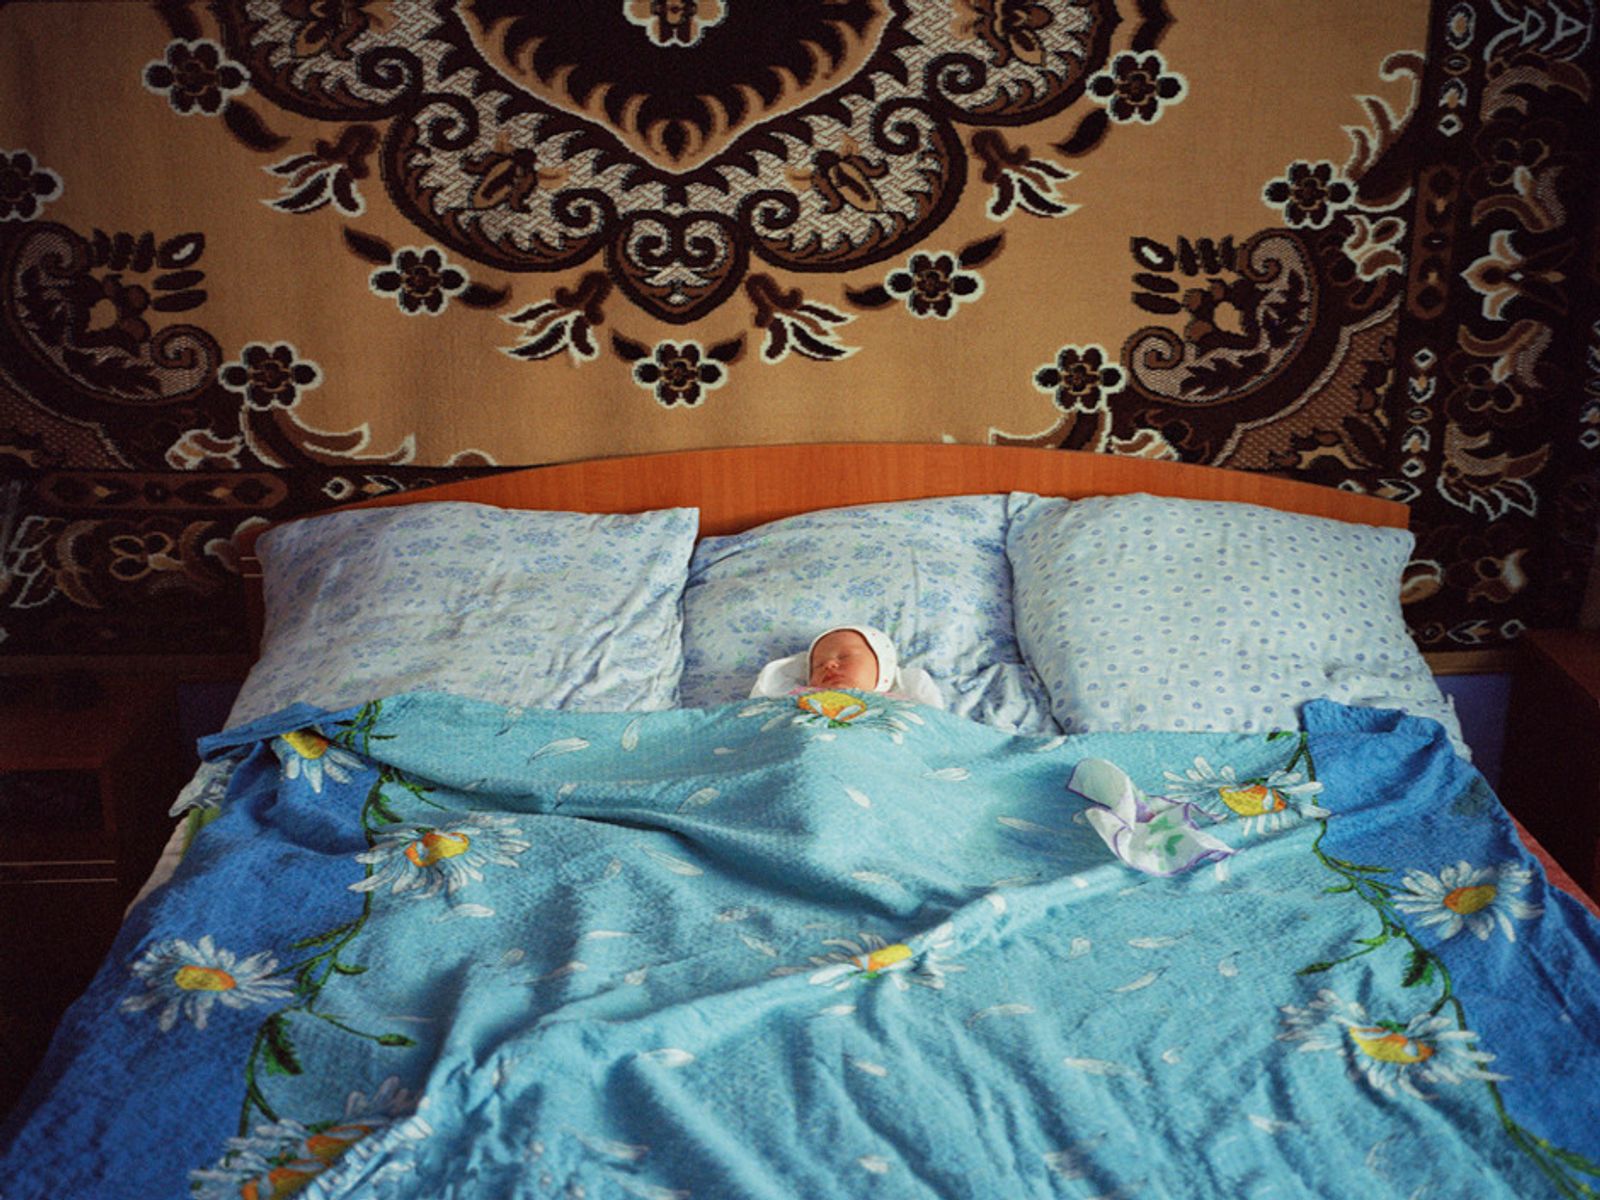 © Andrea Diefenbach - A baby is sleeping. His father and grandmother live in Italy.